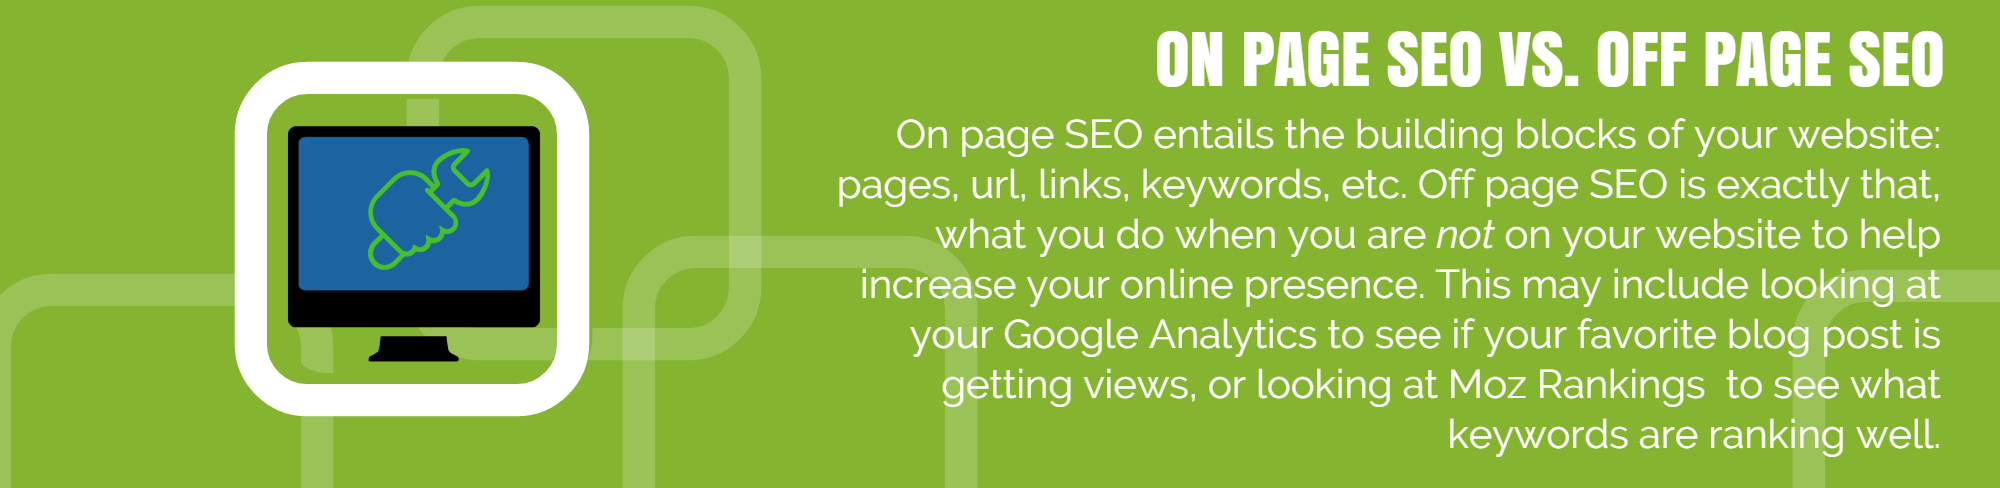 On page vs off page SEO